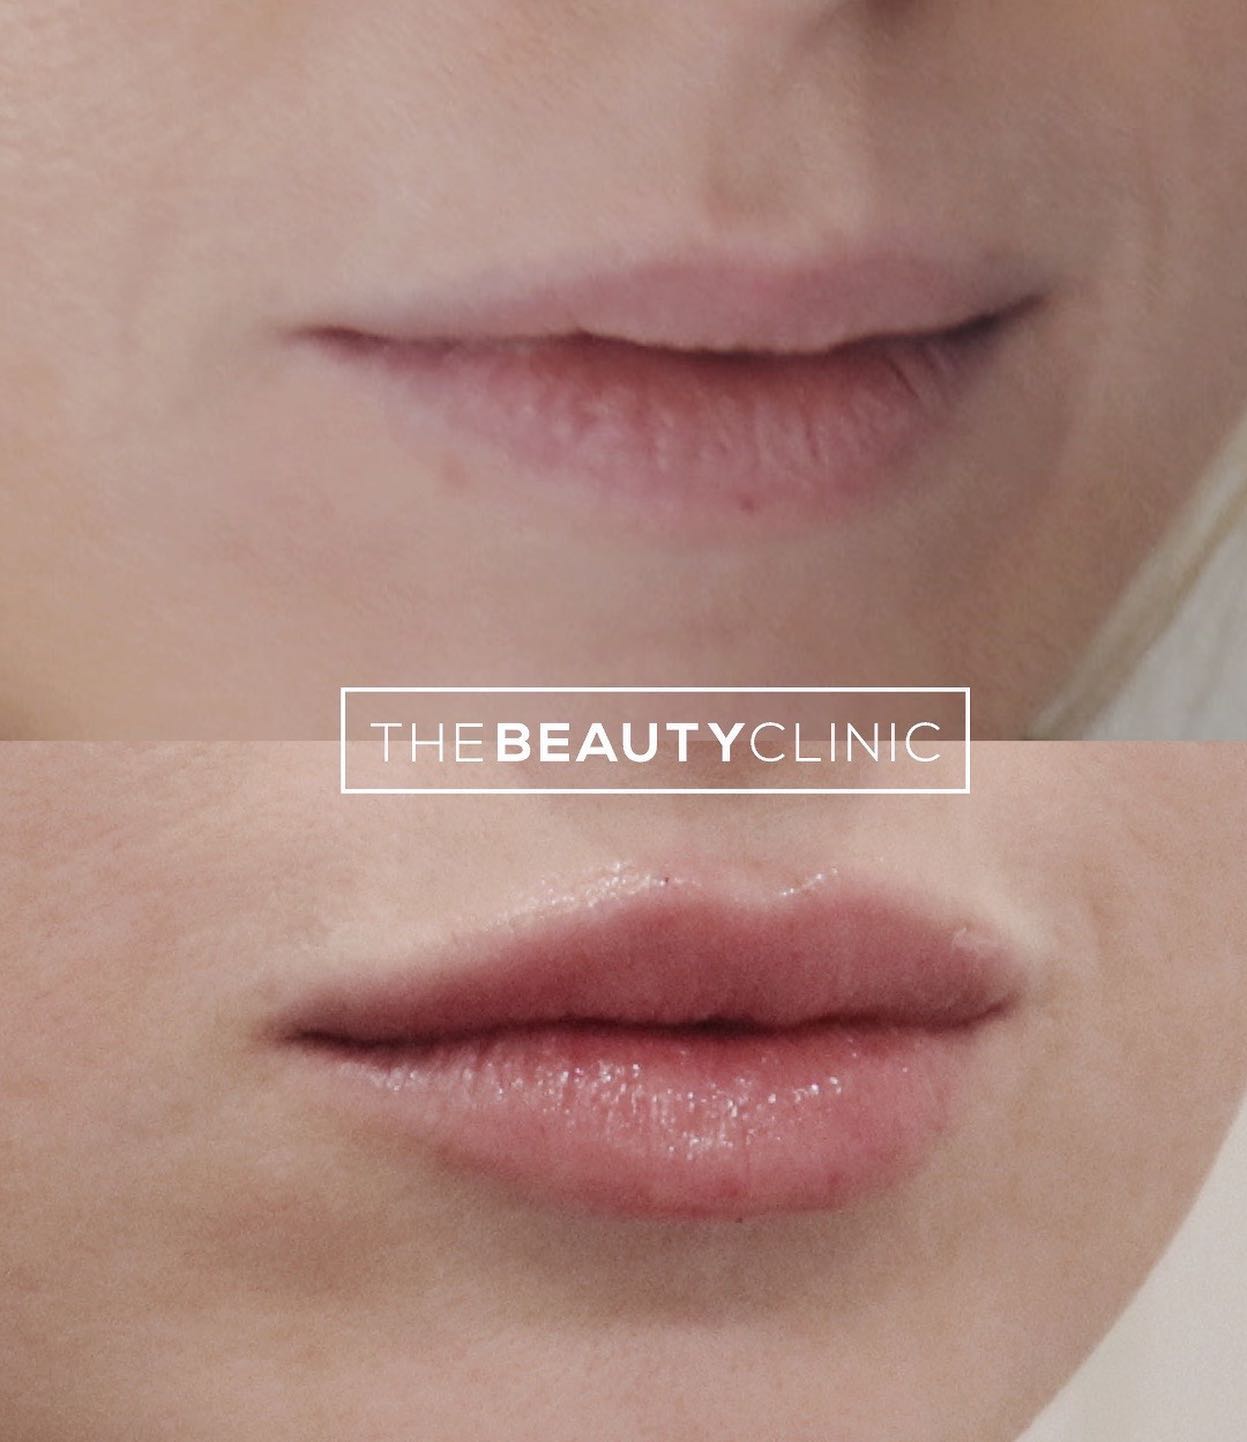 The Beauty Clinic We used Restylane Kysse to gently add volume and define the shape of these pretty lips